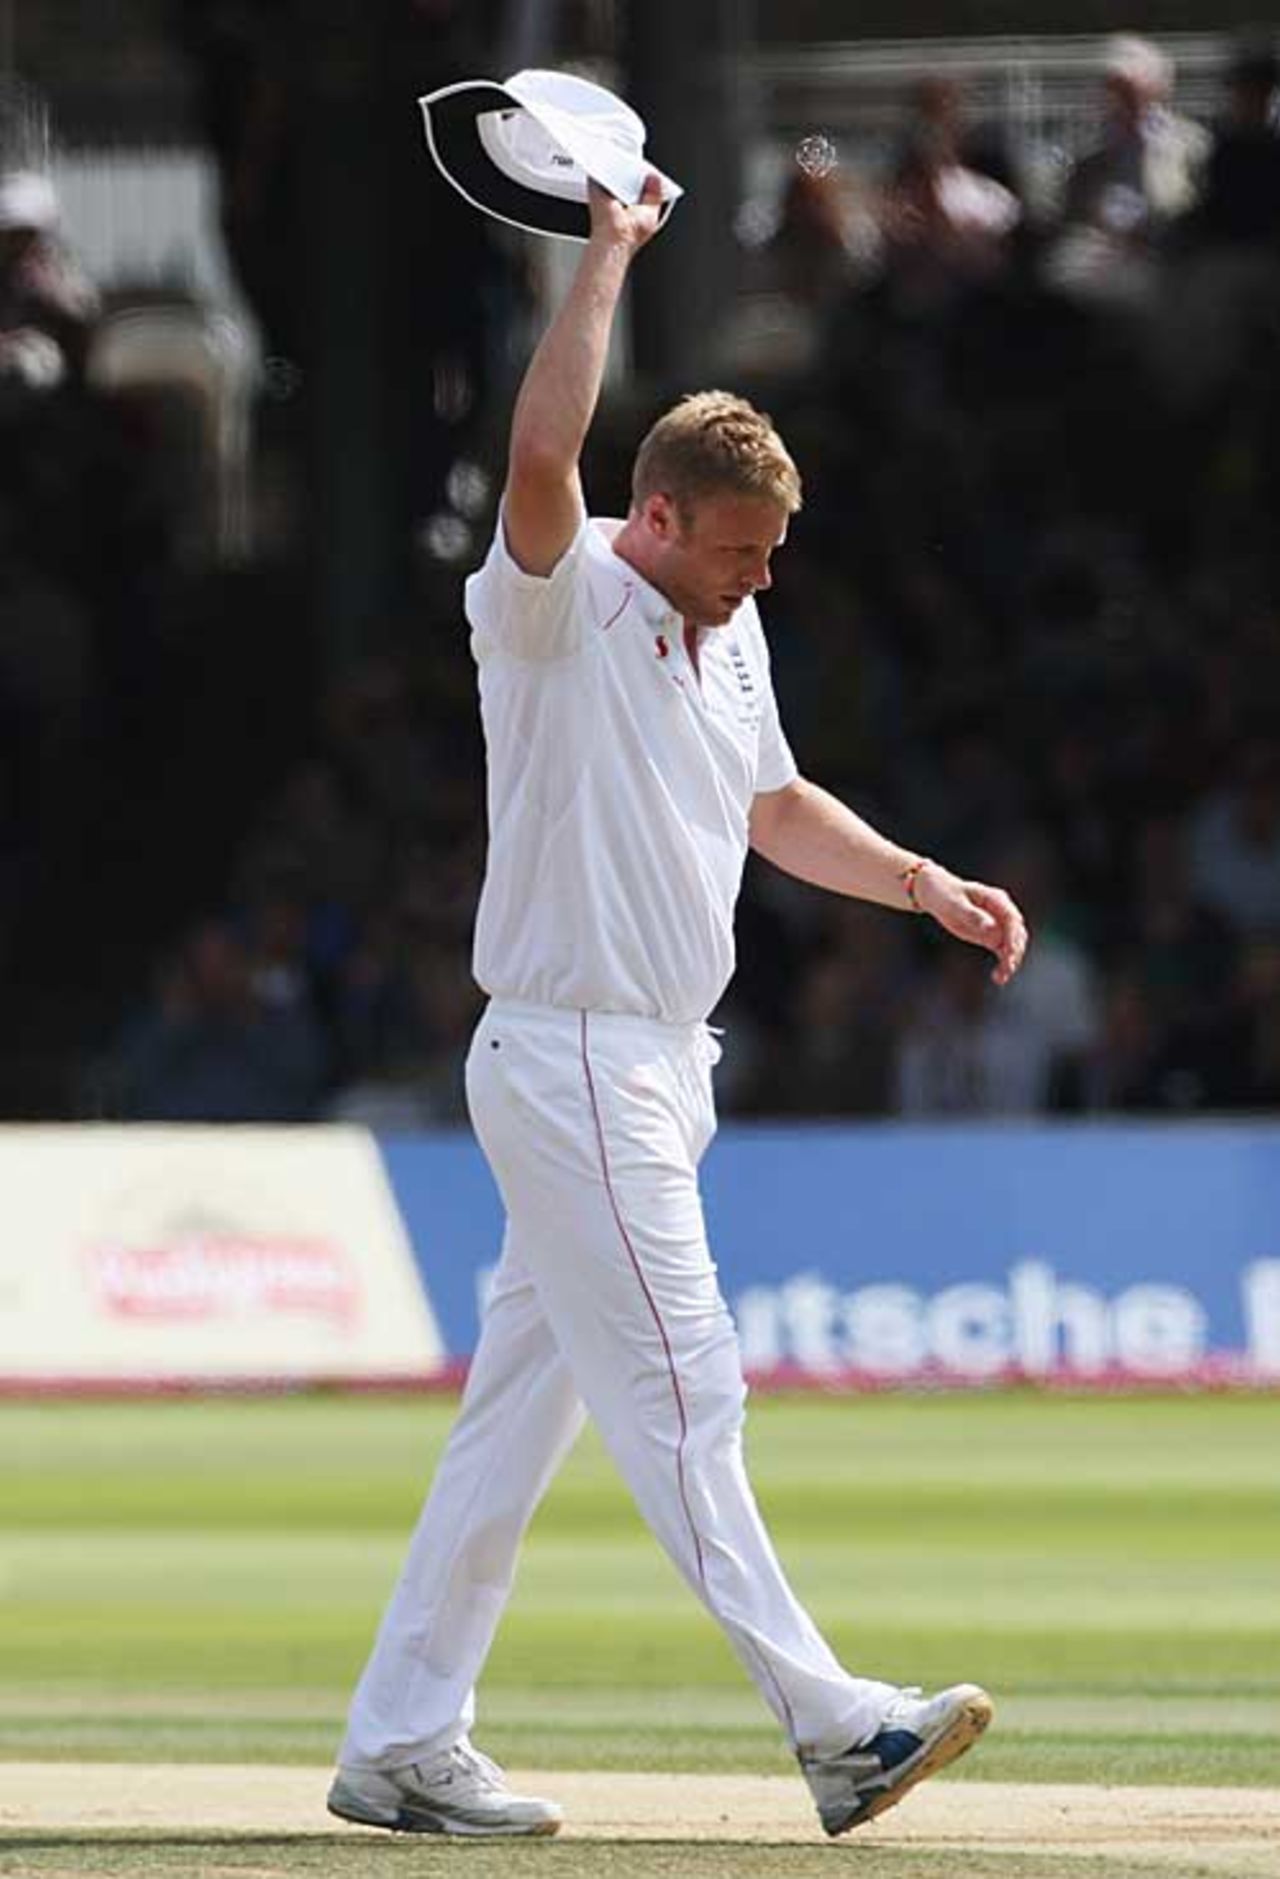 Andrew Flintoff salutes the crowd after removing Brad Haddin, England v Australia, 2nd Test, Lord's, 5th day, July 20, 2009